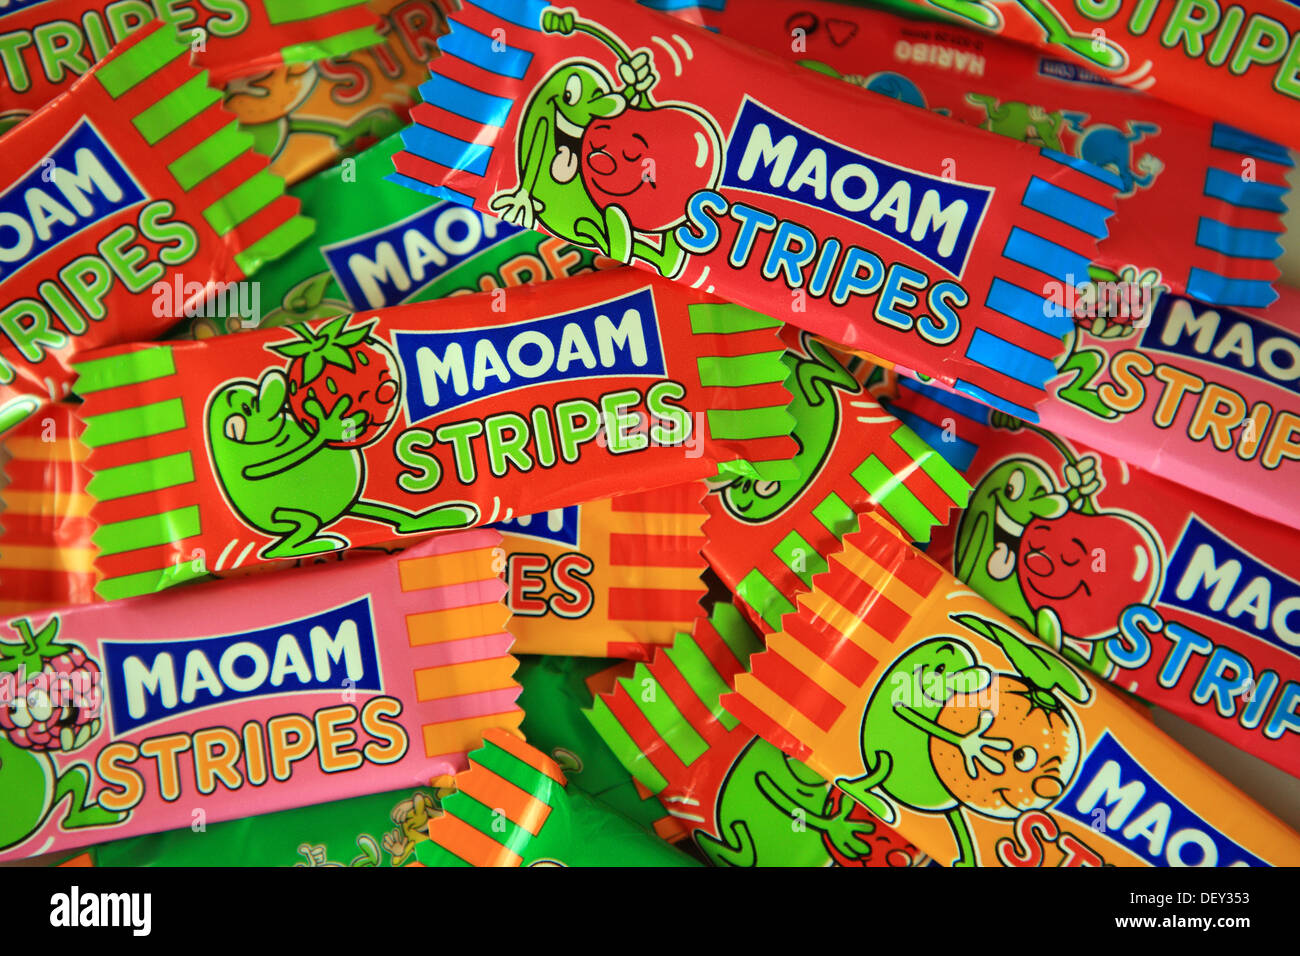 Children's fruit flavoured chewy sweets, Maoam Stripes, in colourful wrappers Stock Photo